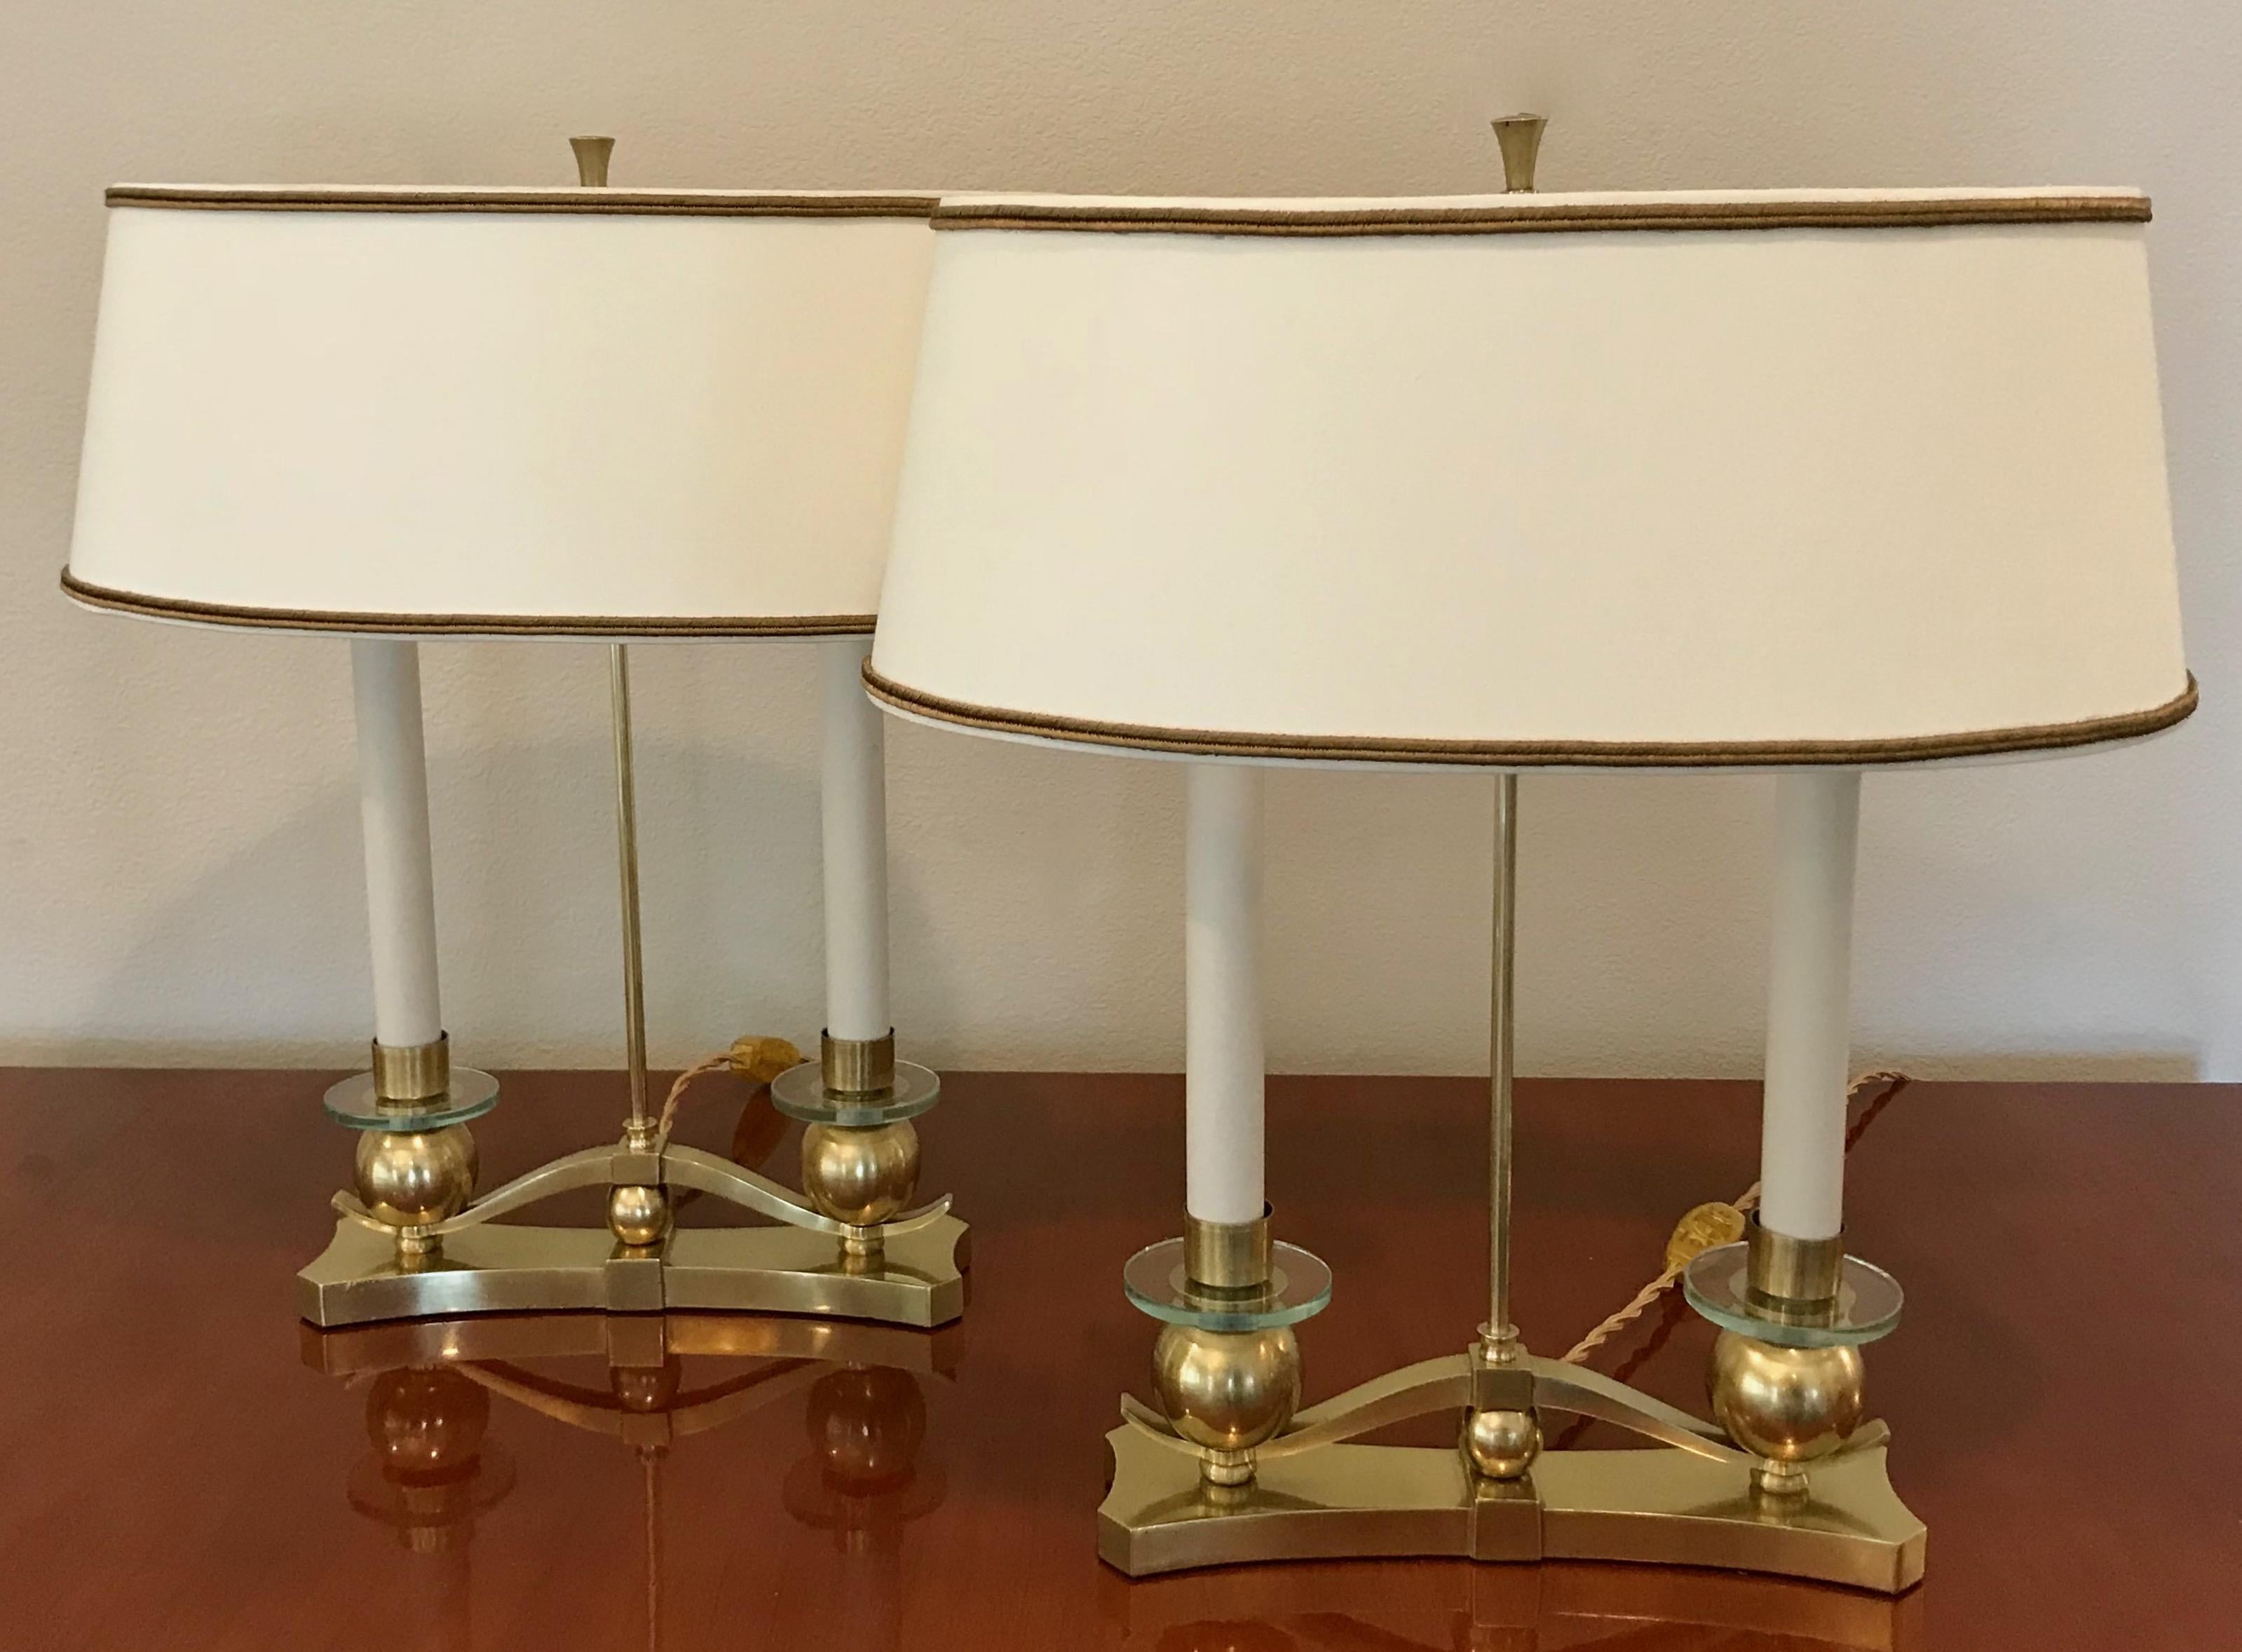 A beautiful pair of French Art Deco or Moderne style table or bouillotte lamps. Distinctive S-curved rests atop a brass ball and repeats this motif supporting two candle arms with glass bobeche. Oval shaped shades allow for more narrow use such as